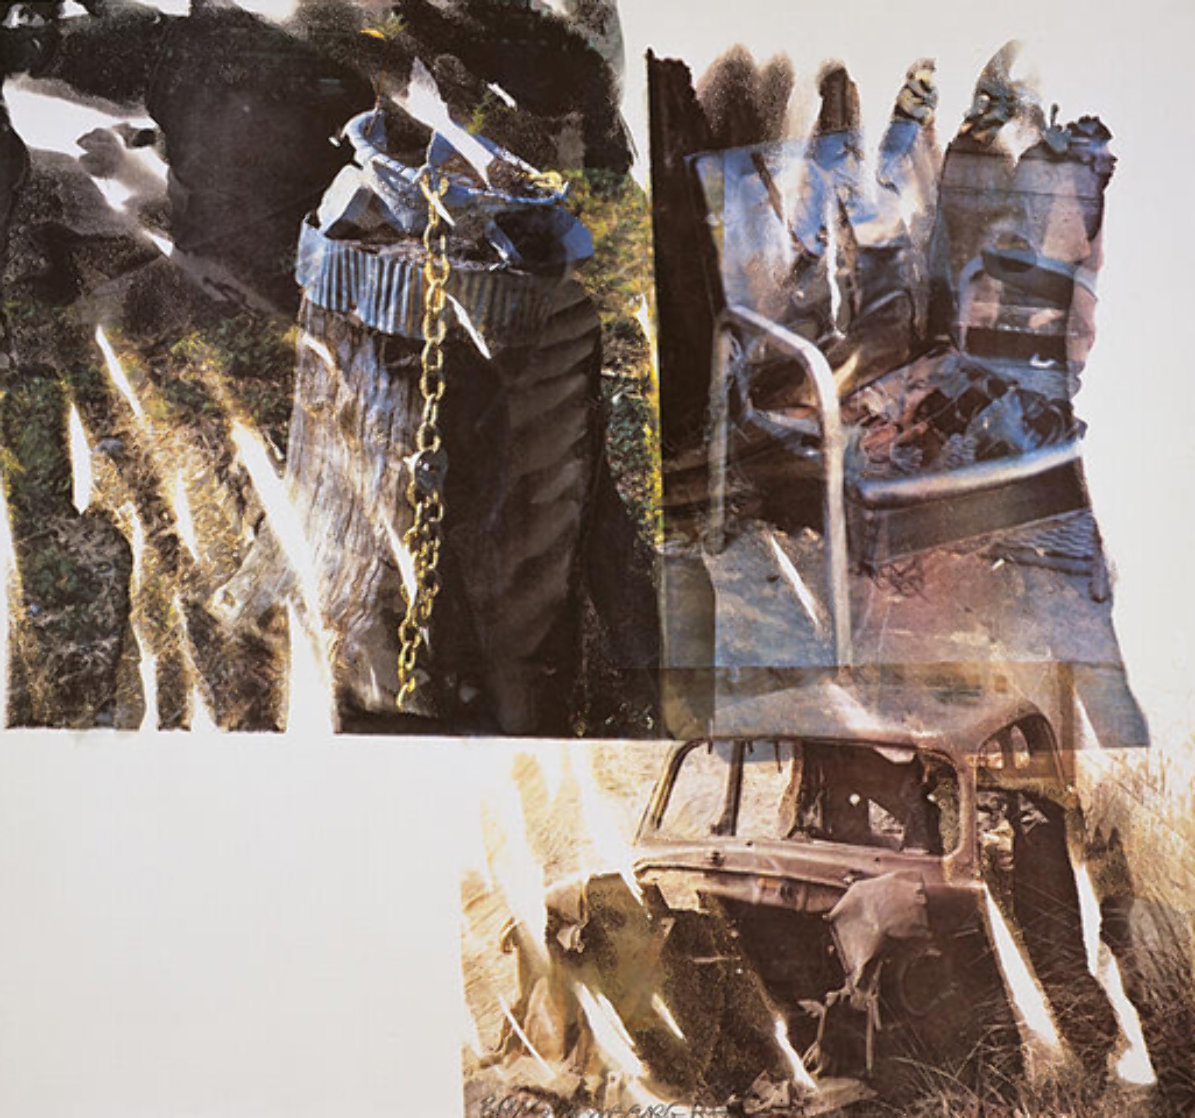 Relic (Speculations) - 1997 HS Limited Edition Print by Robert Rauschenberg